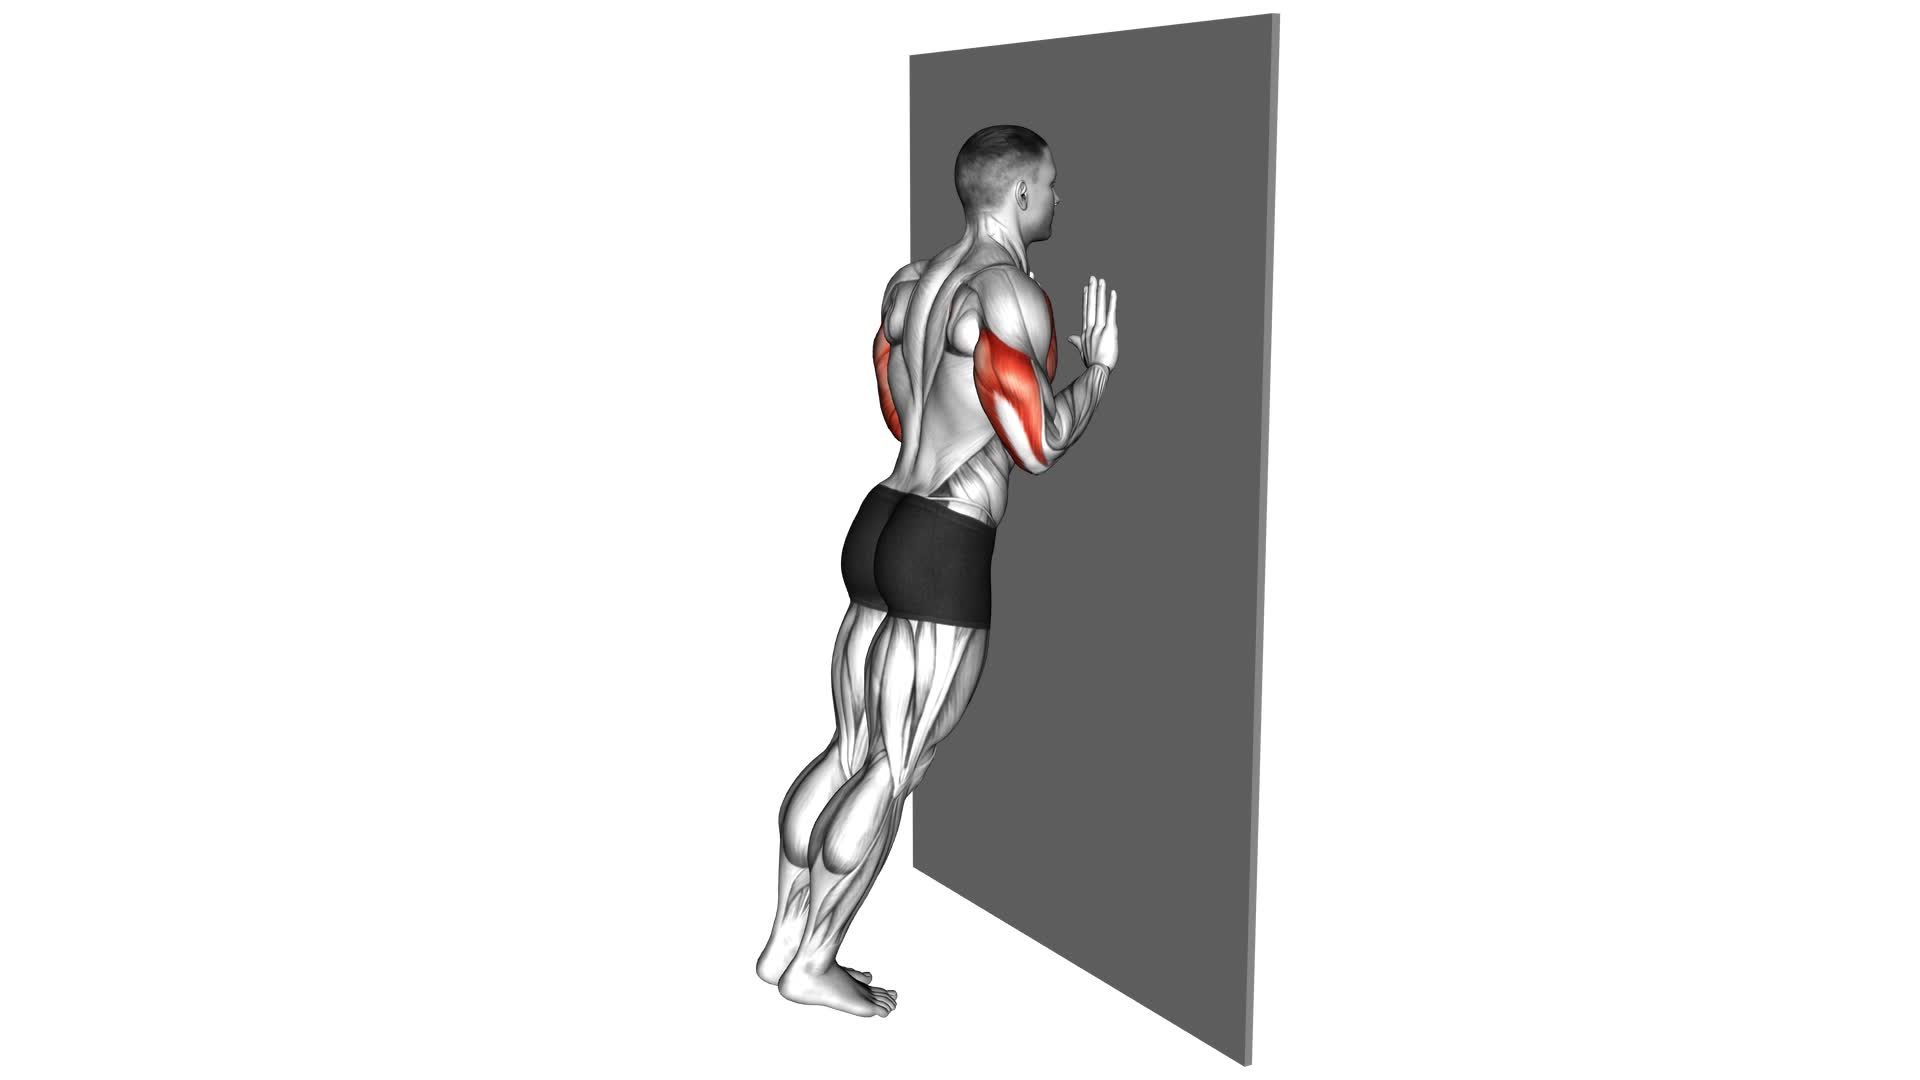 Close Grip Push-Up Against the Wall - Video Exercise Guide & Tips